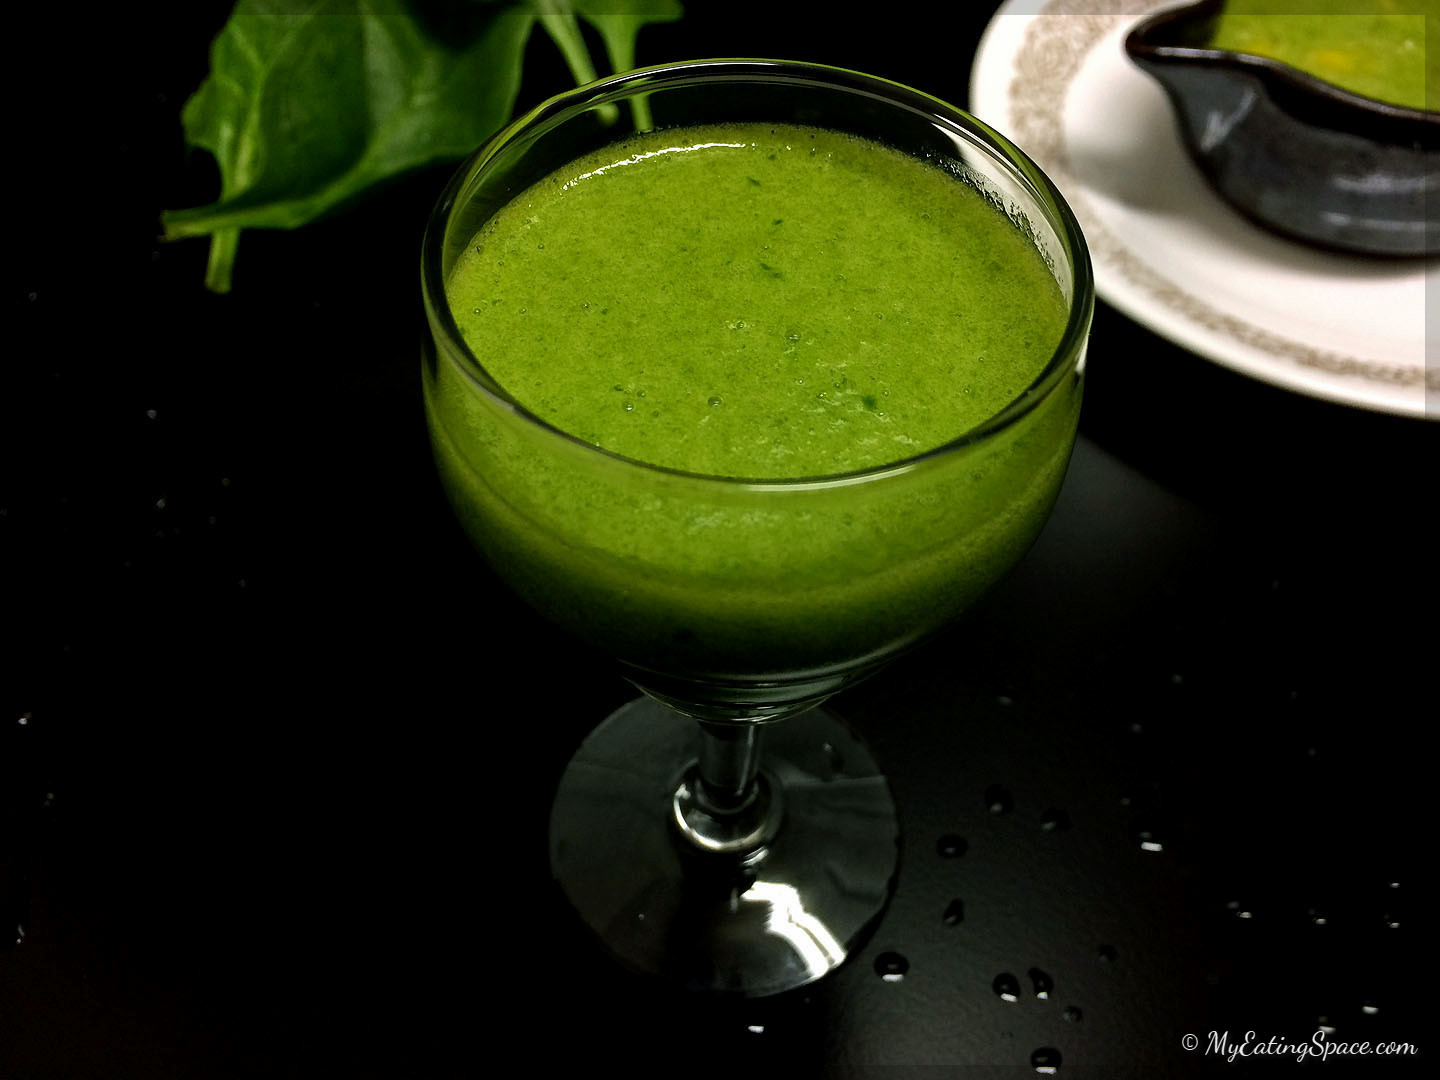 Unripe green mango spinach smoothie is a hydrating drink with a balanced sweet and sour flavor and keeps you healthy. Green mangoes are added raw. The drink is purely vegan and gluten free. Get more recipes at myeatingspace.com